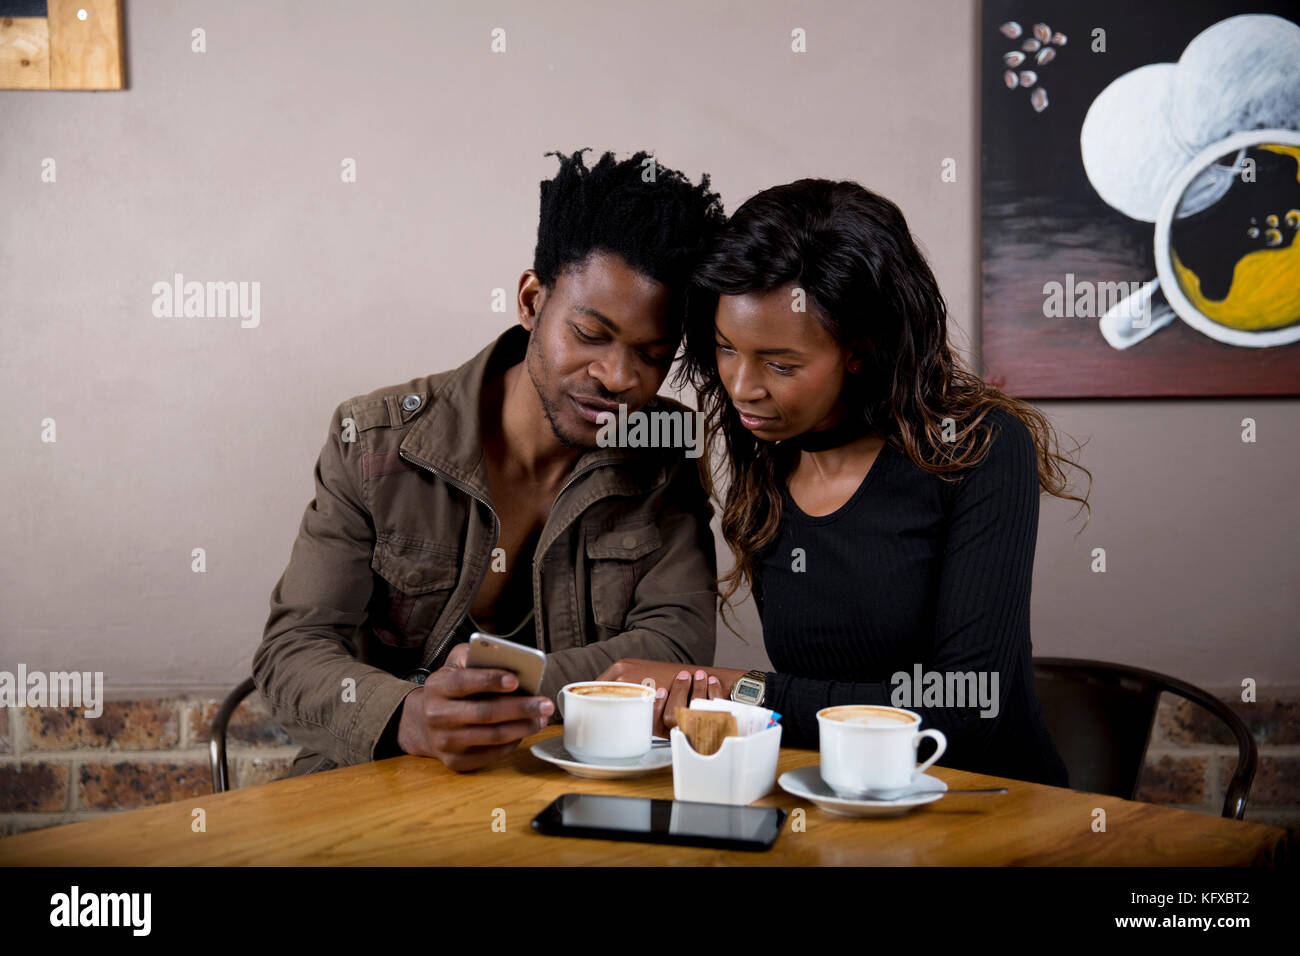 Couple having coffee and looking at a phone Stock Photo